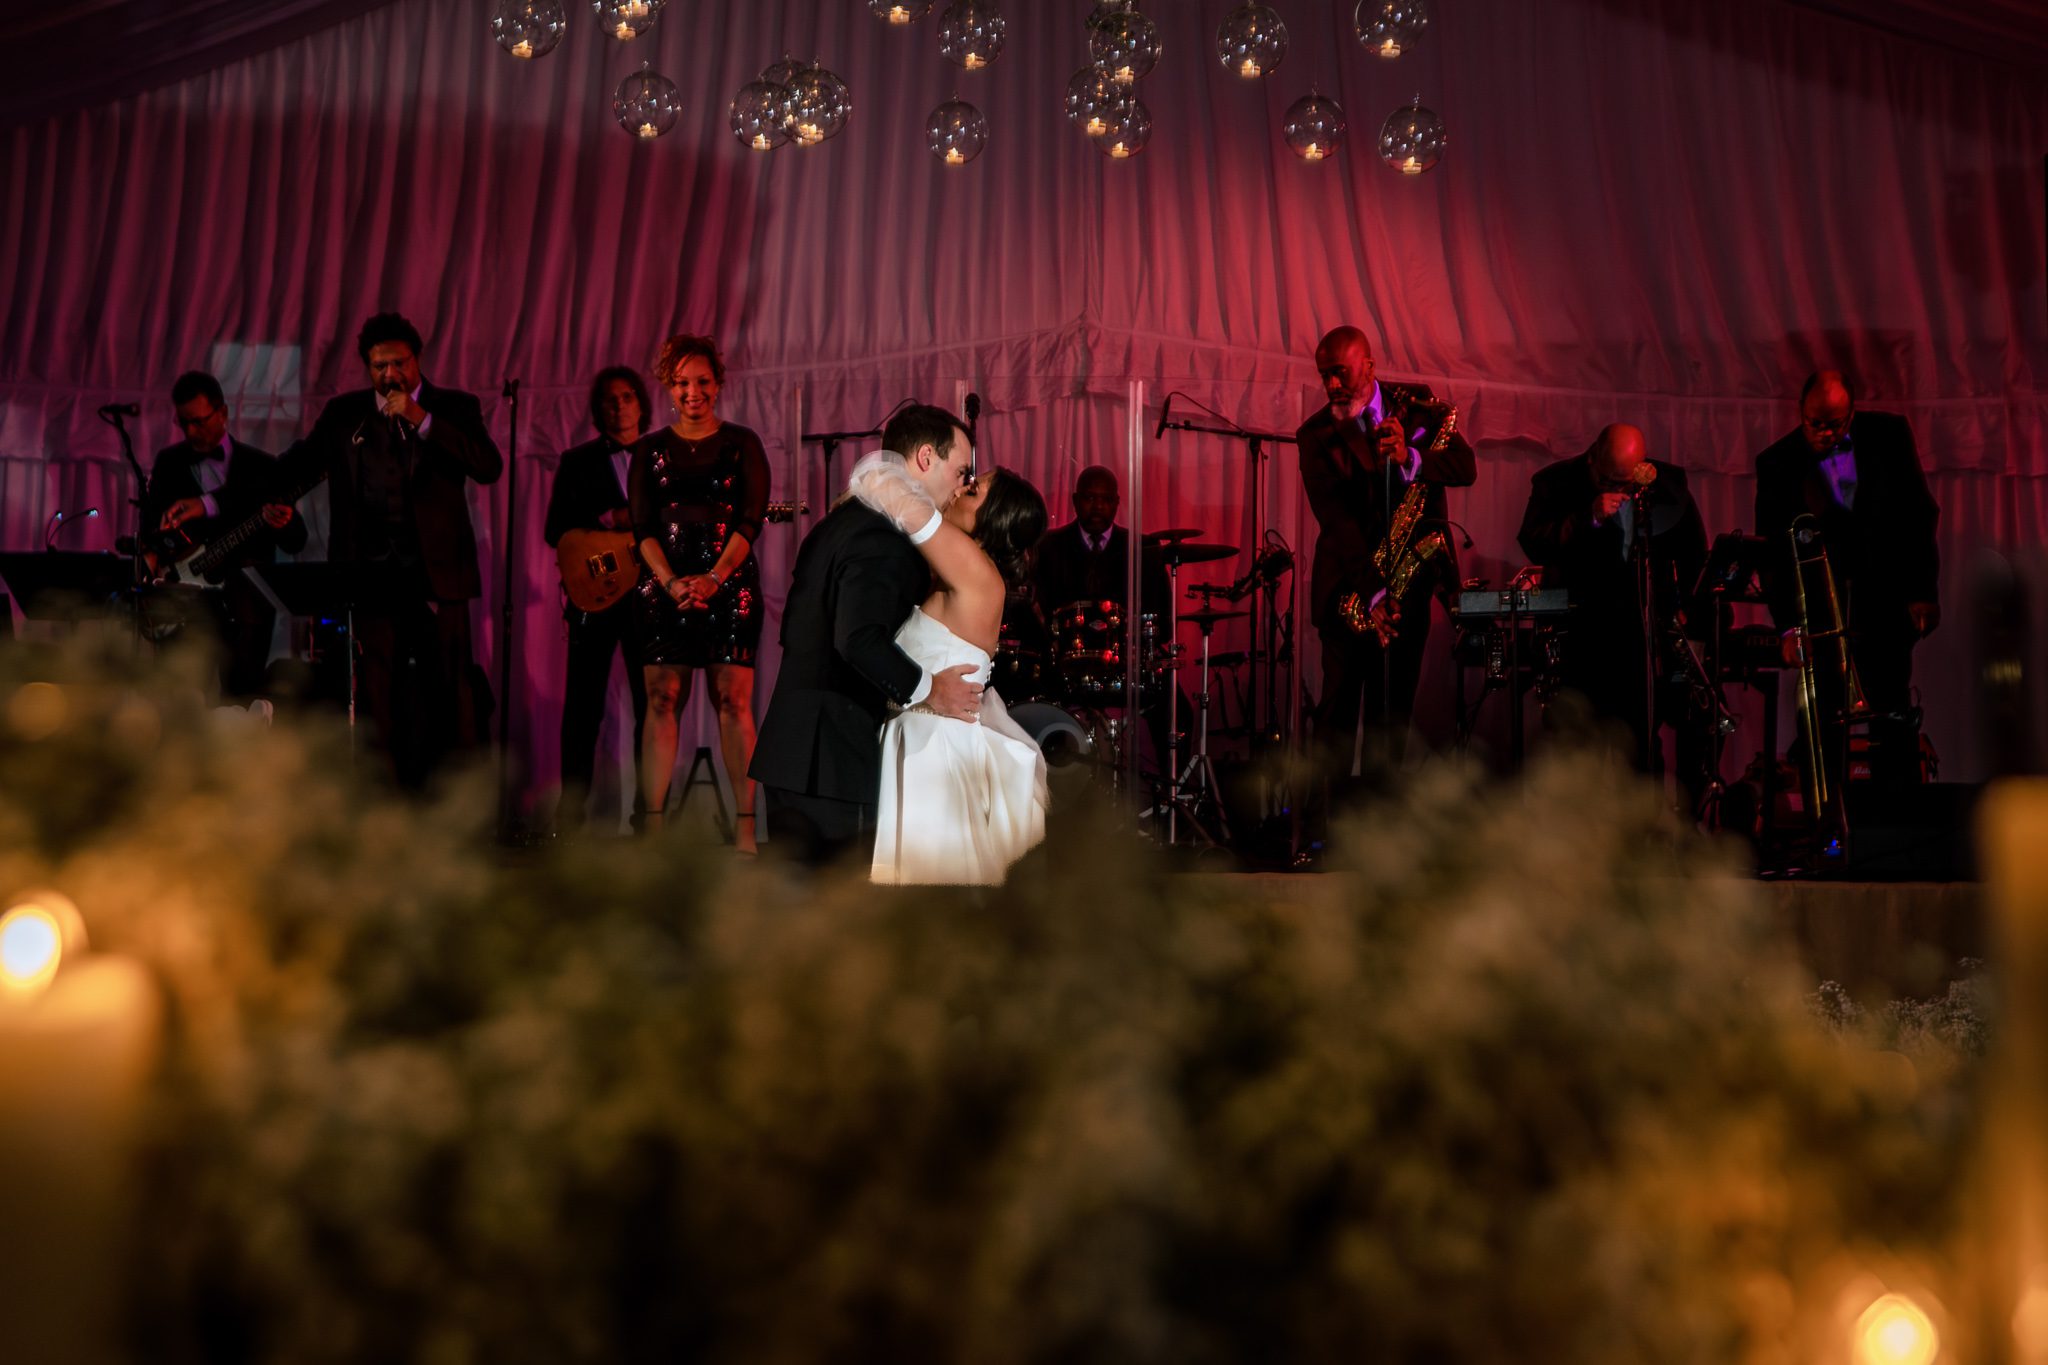 Bride and groom sharing the first dance and kissing with a band standing behind them on the stage with red lights